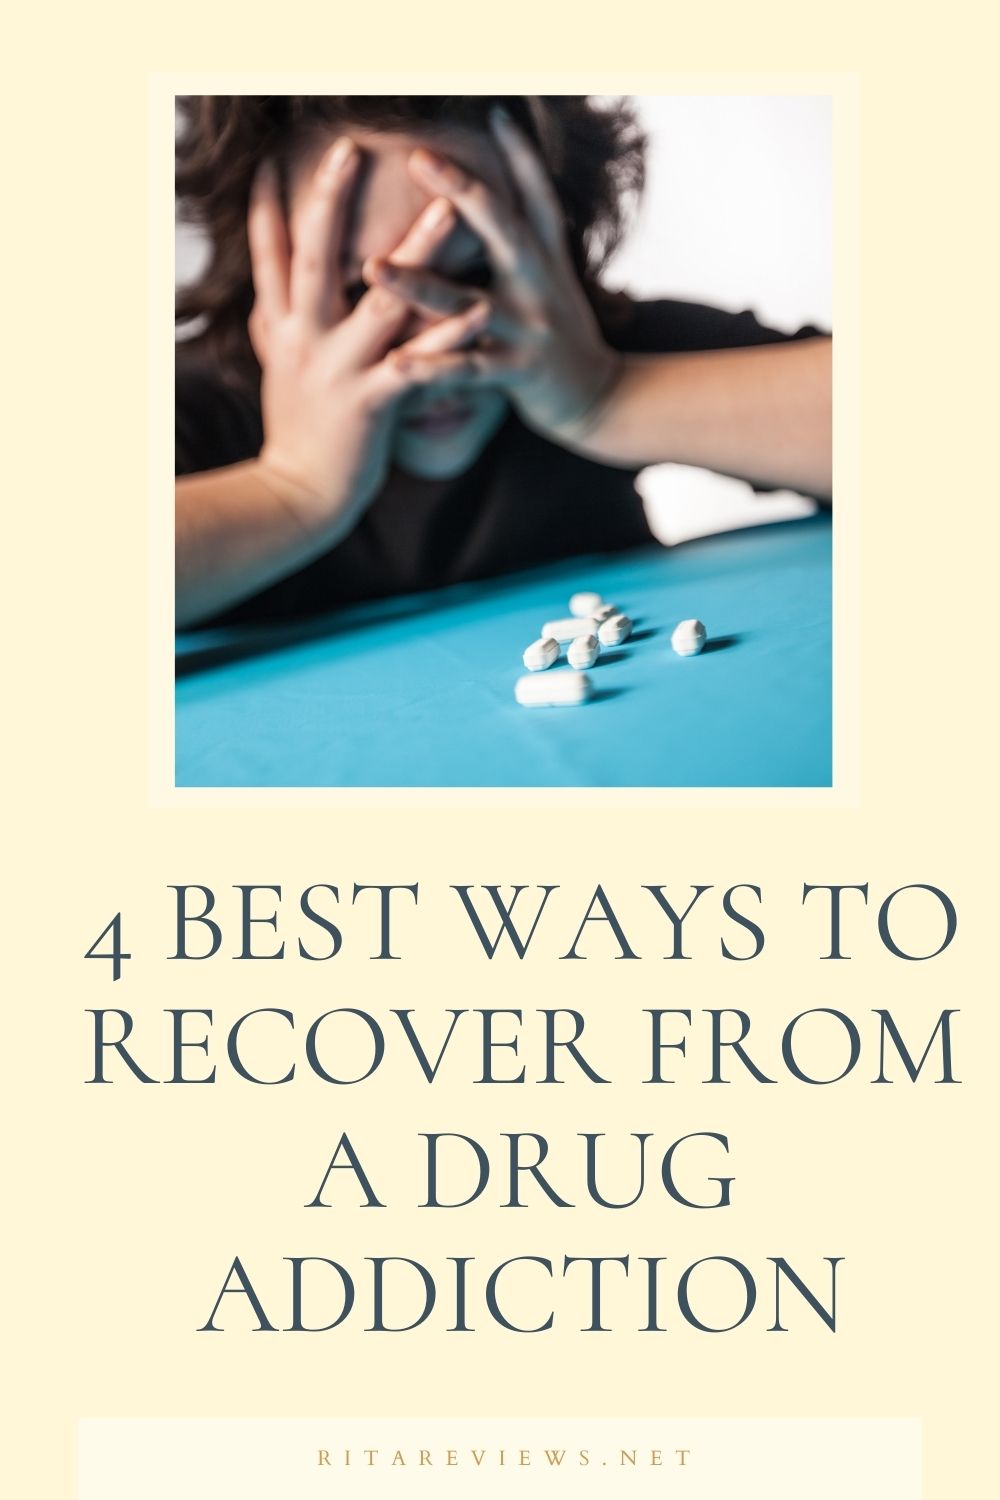 4 Best Ways To Recover From a Drug Addiction